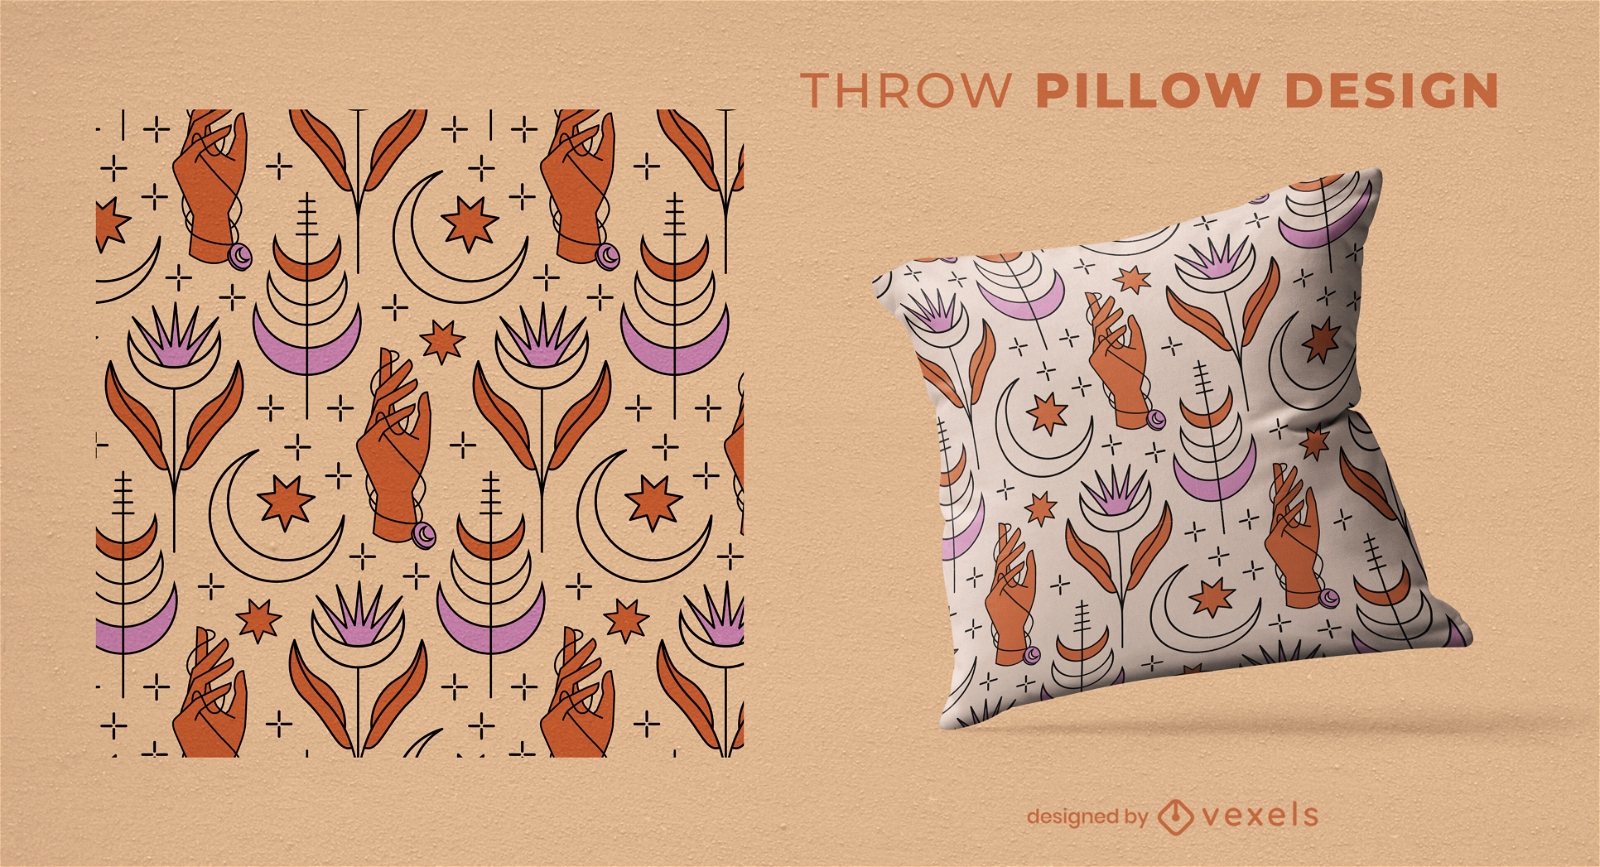 Moon and hand pattern throw pillow design